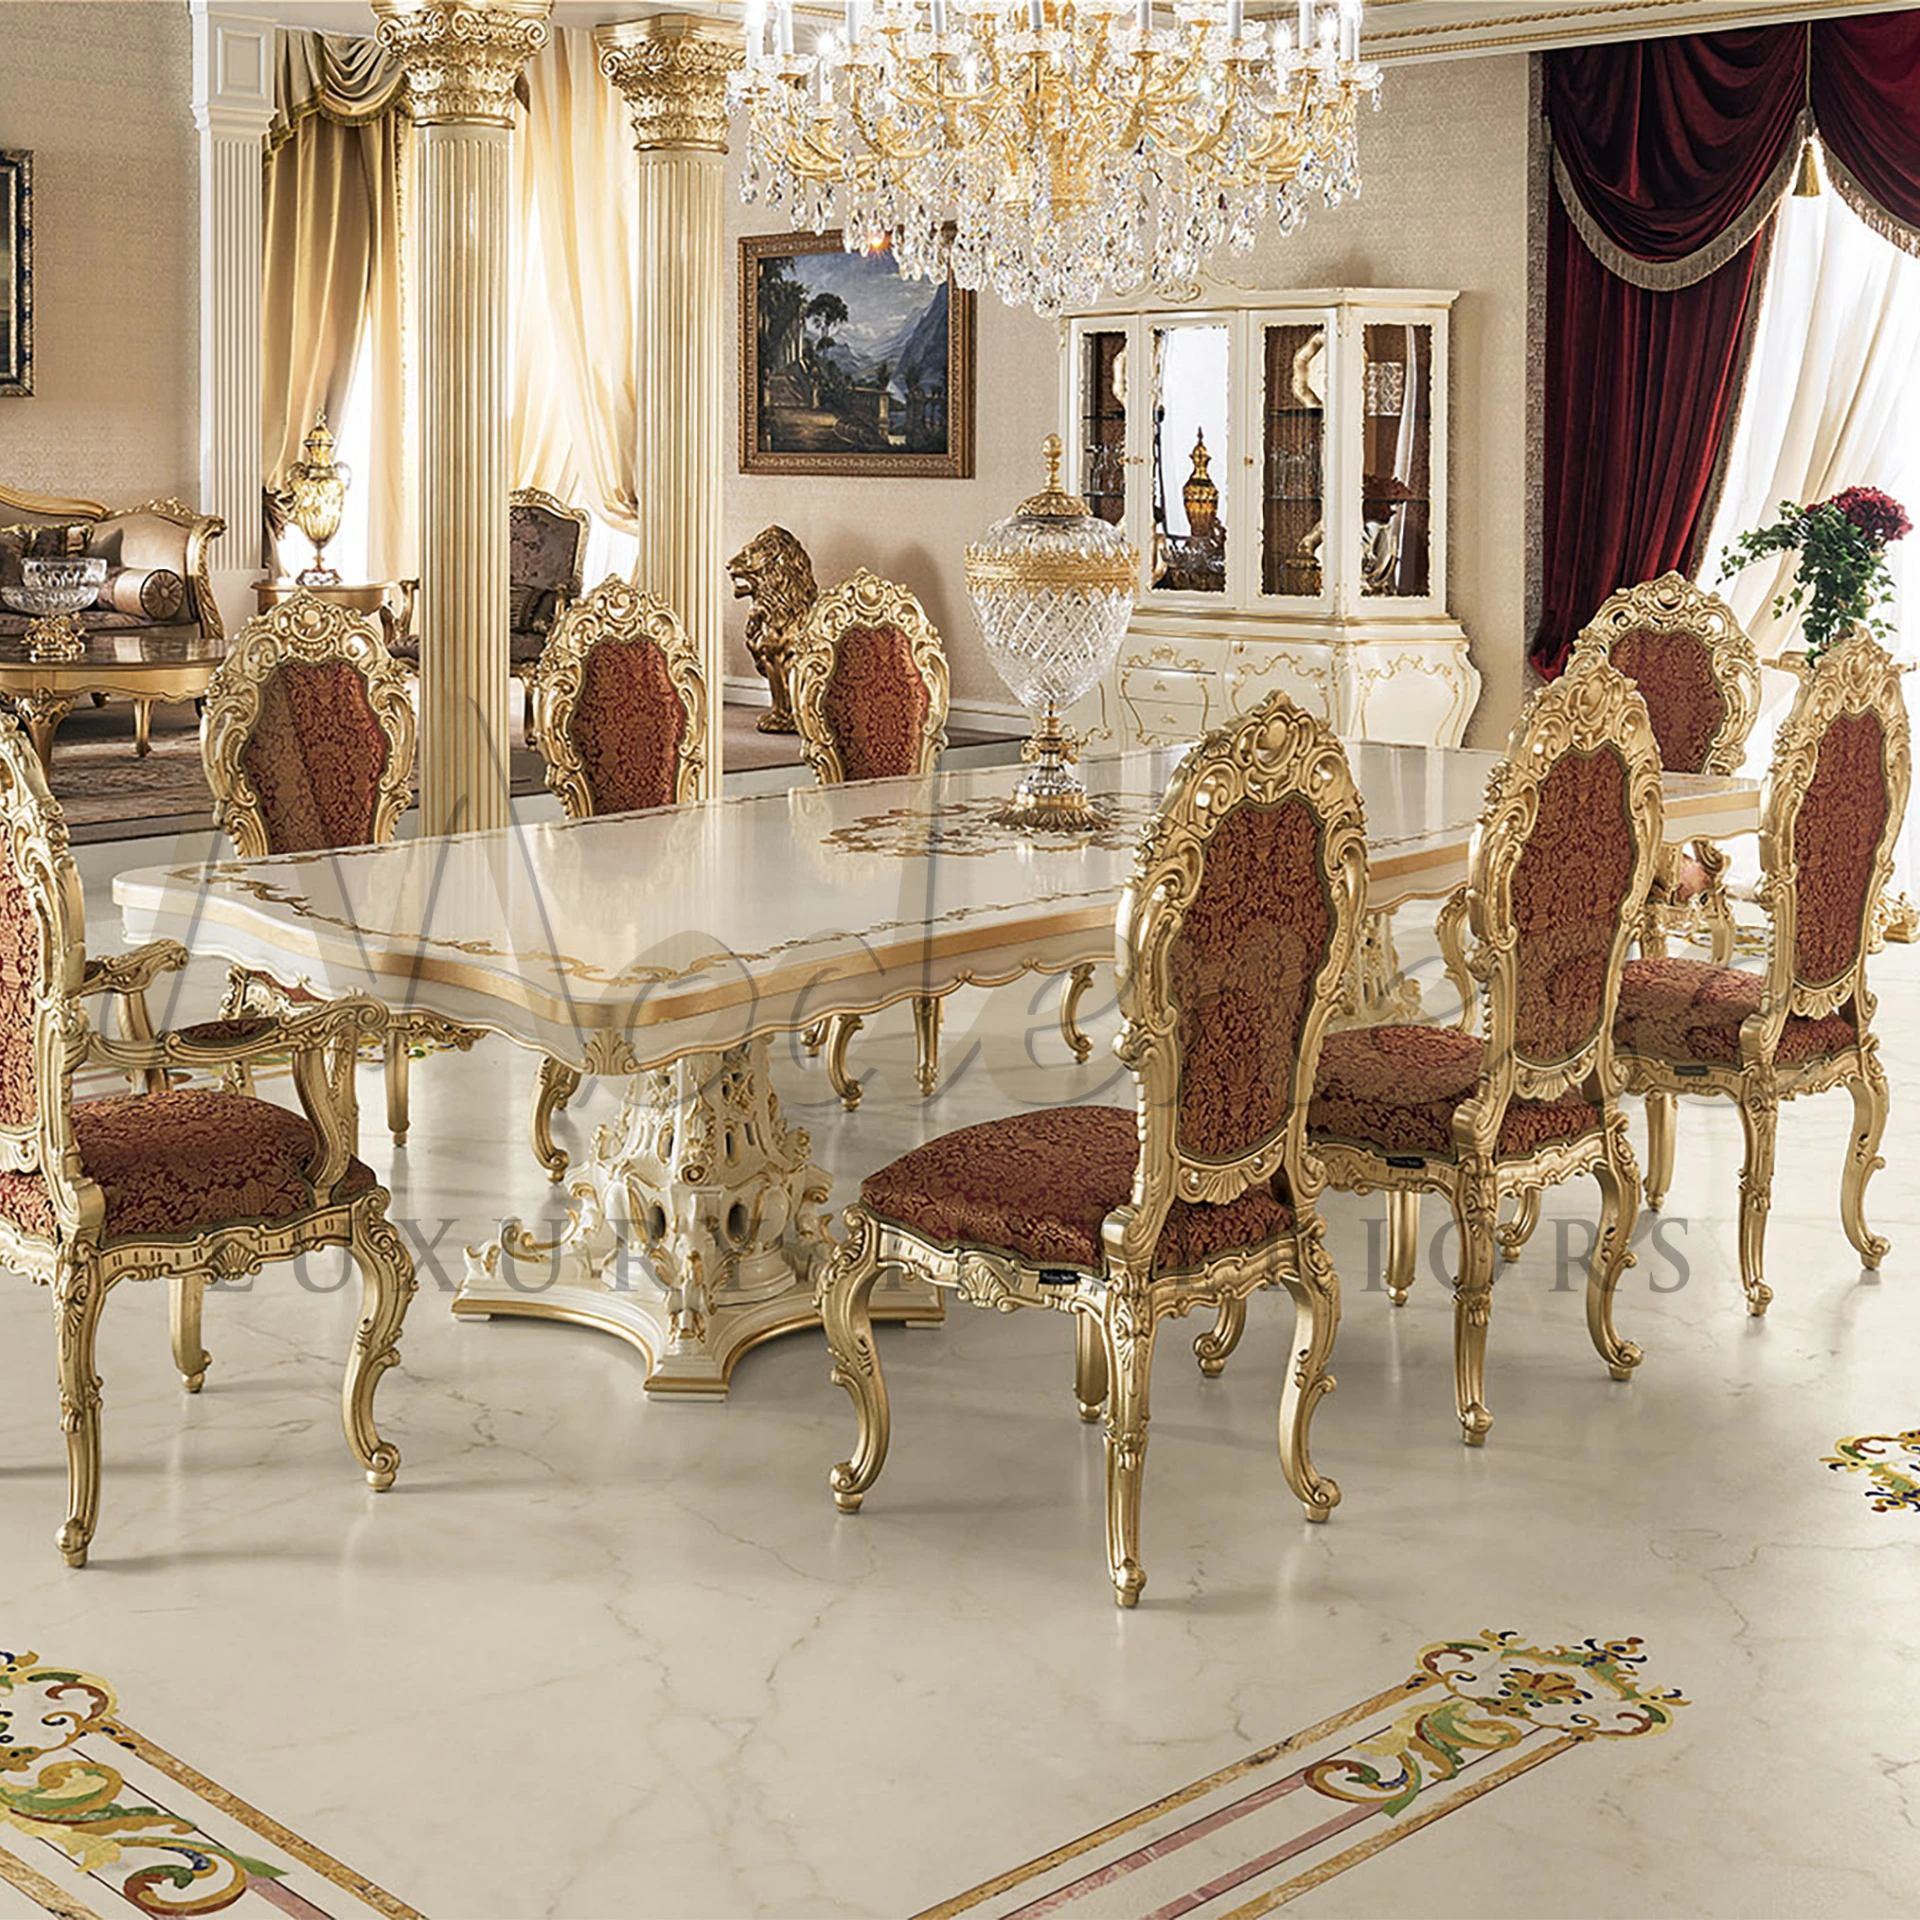 Infuse your new mansion with royal charm using Modenese Furniture's baroque dining table. Hand-carved squiggle details, gold leaves, and patterned fabric create timeless luxury.